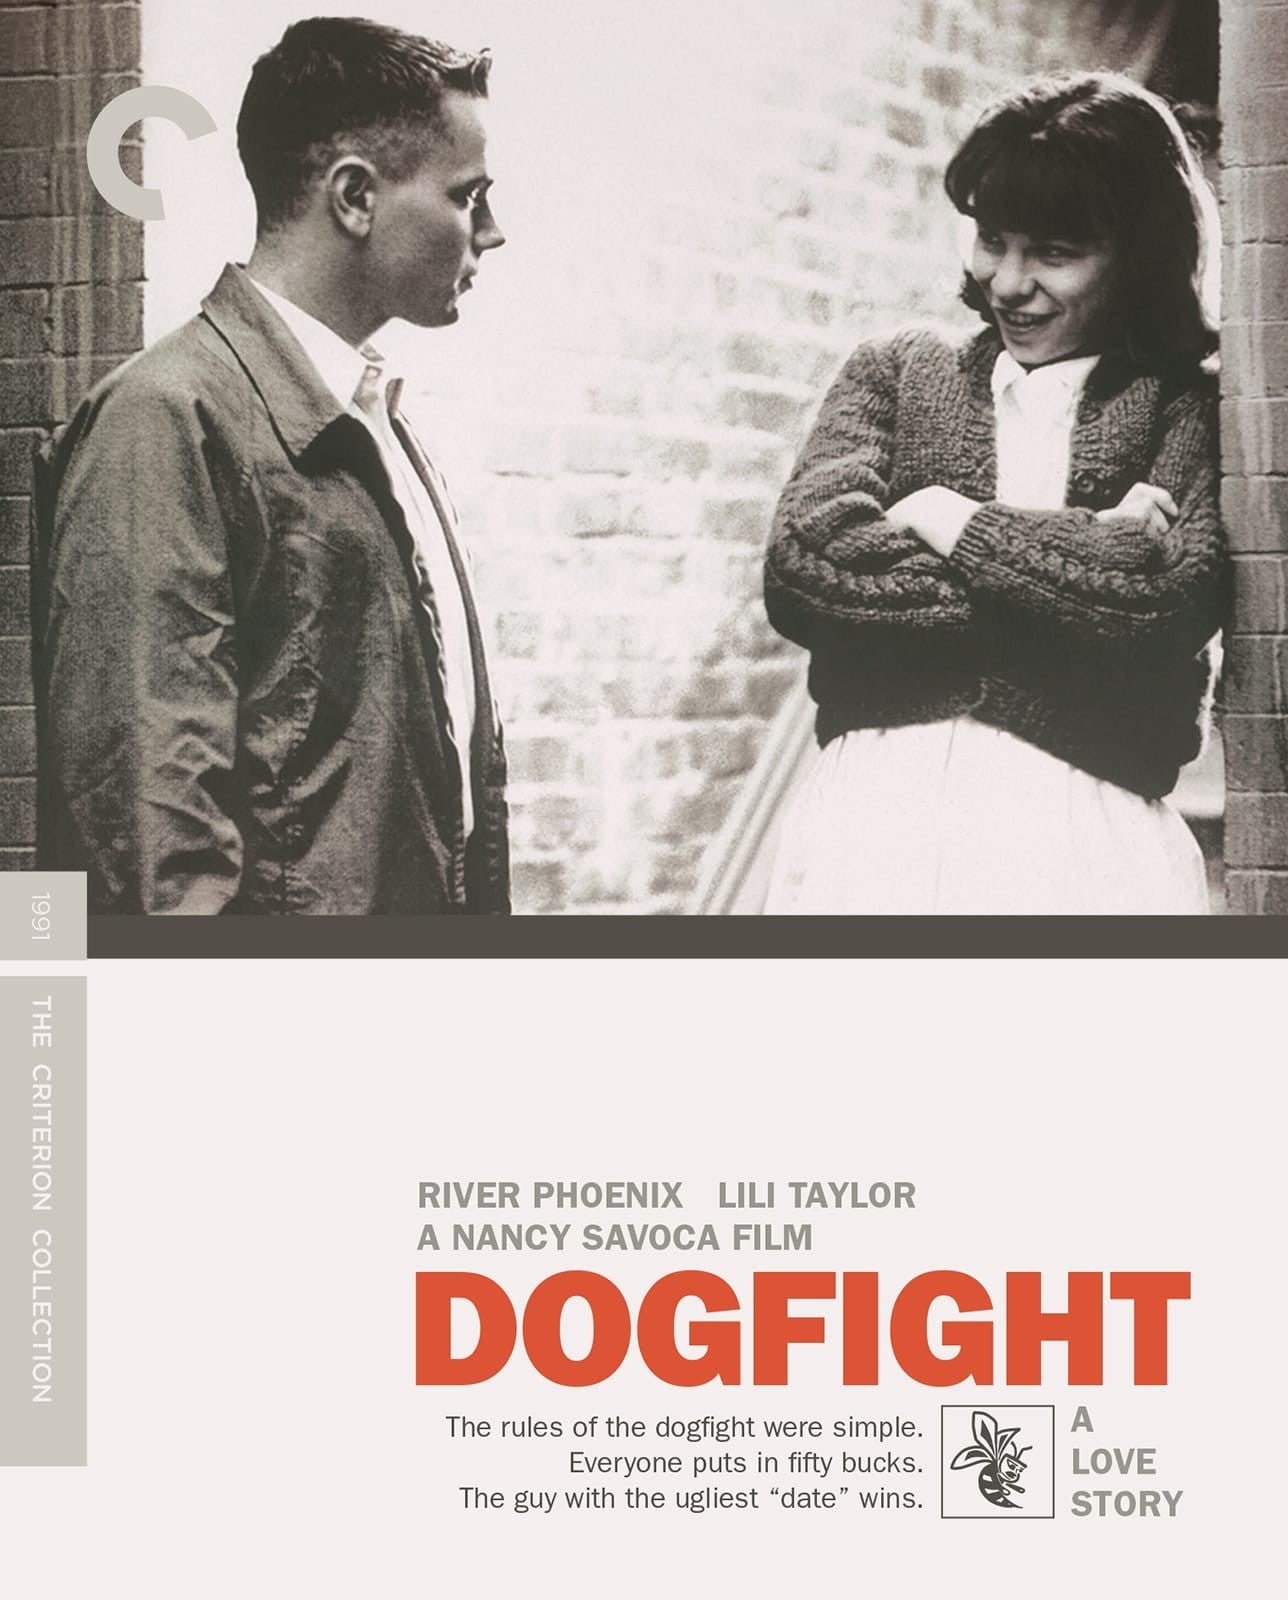 Dogfight Blu-ray (Criterion Collection) [Preorder]